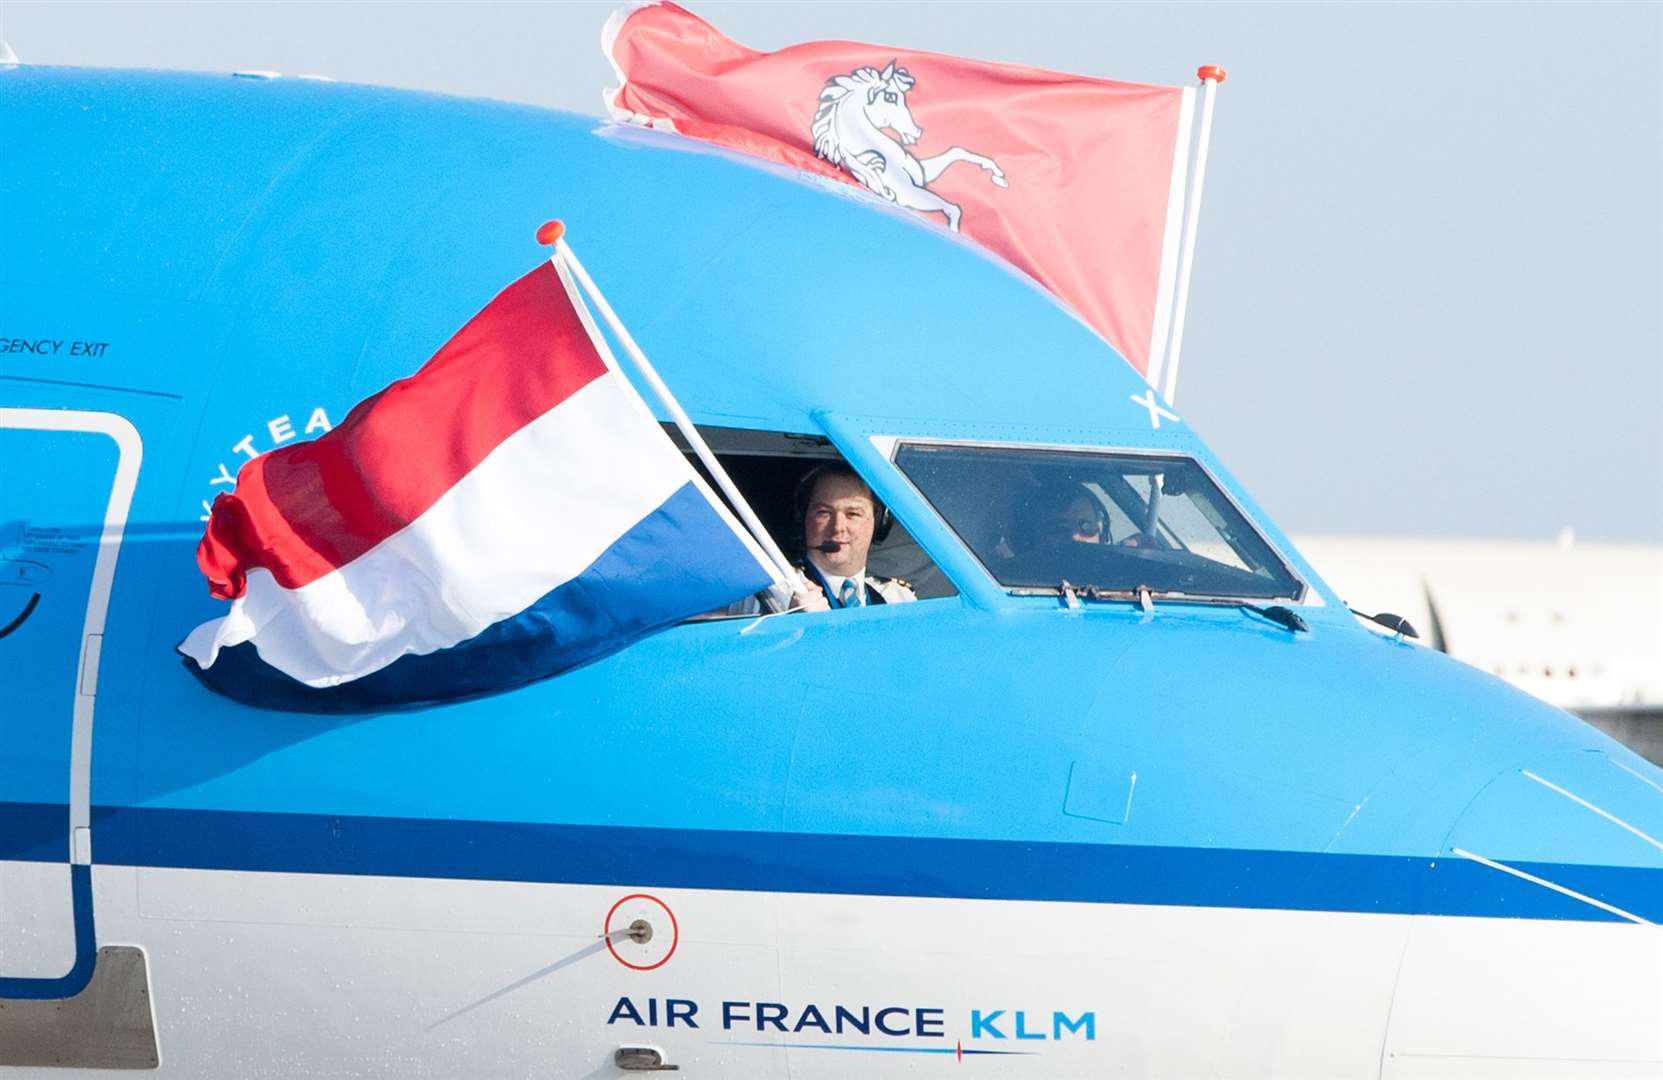 KLM took off from Manston a year before the airport closed